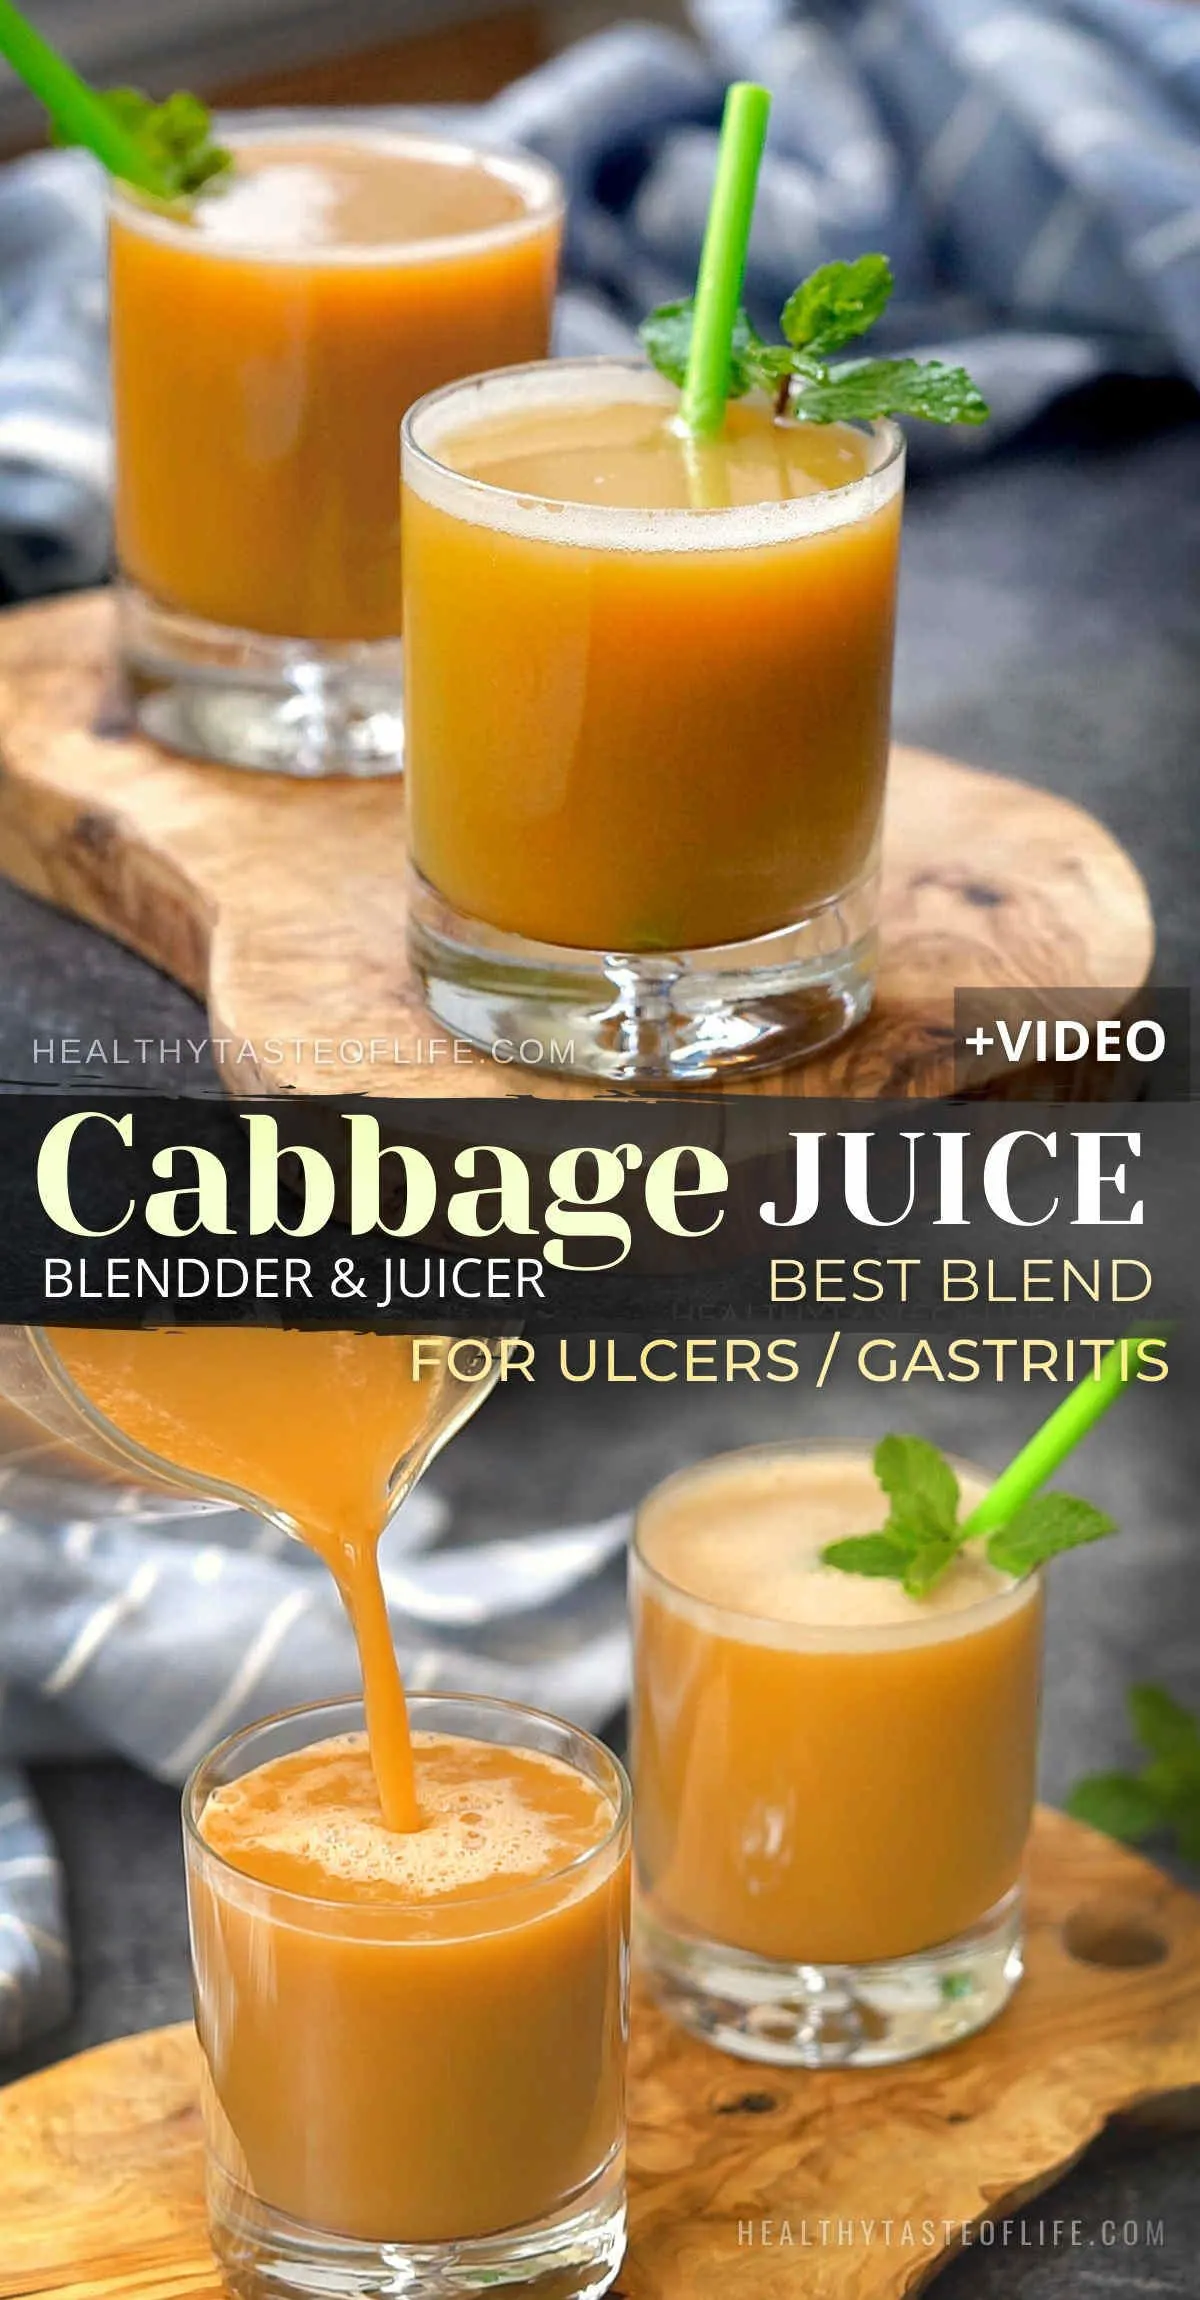 The best cabbage juice recipe for ulcers, gastritis, ulcerative colitis and other gut issues. Juicing cabbage 2 different ways: in a blender (without a juicer) or a juicer. Each ingredient in this recipe for cabbage juice has powerful health benefits making it a great source of anti-oxidants and vitamins with the ability to restore the gut lining. #cabbagejuice #juicingcabbage #naturalremedies #juiceforulcer #juicing